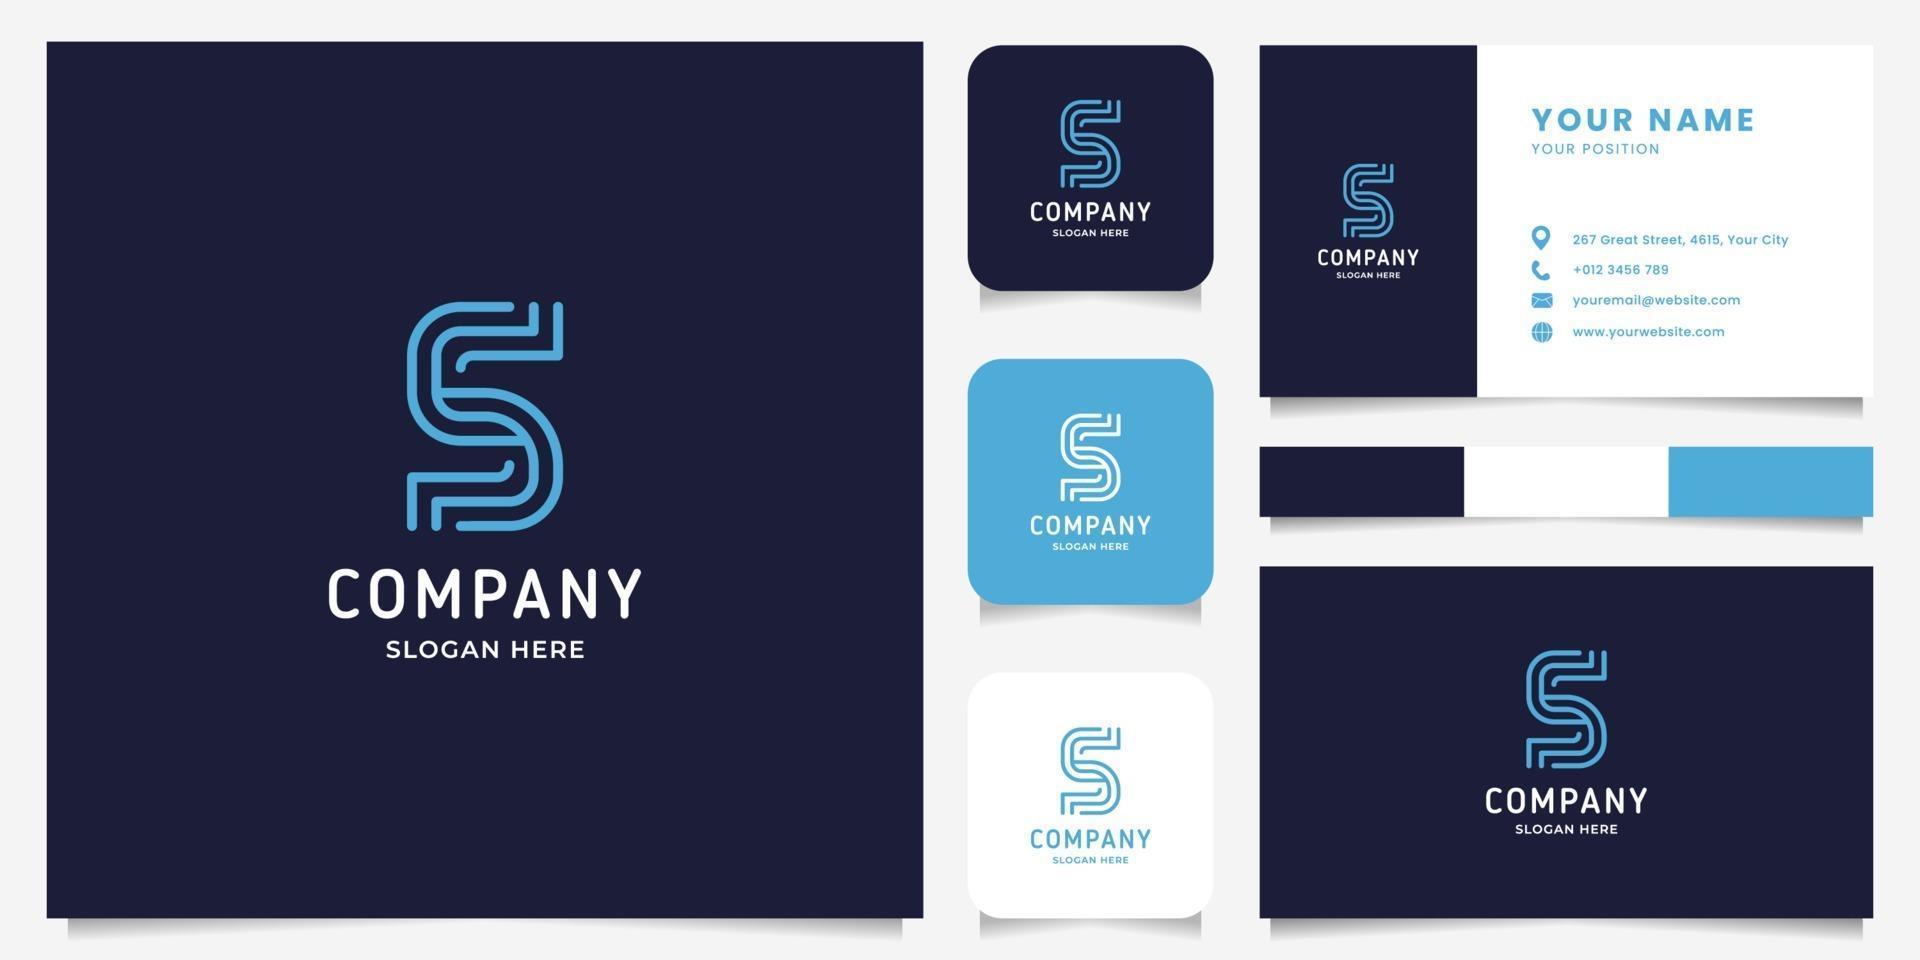 Simple and Minimalist Line Art Letter S Logo with Business Card Template vector